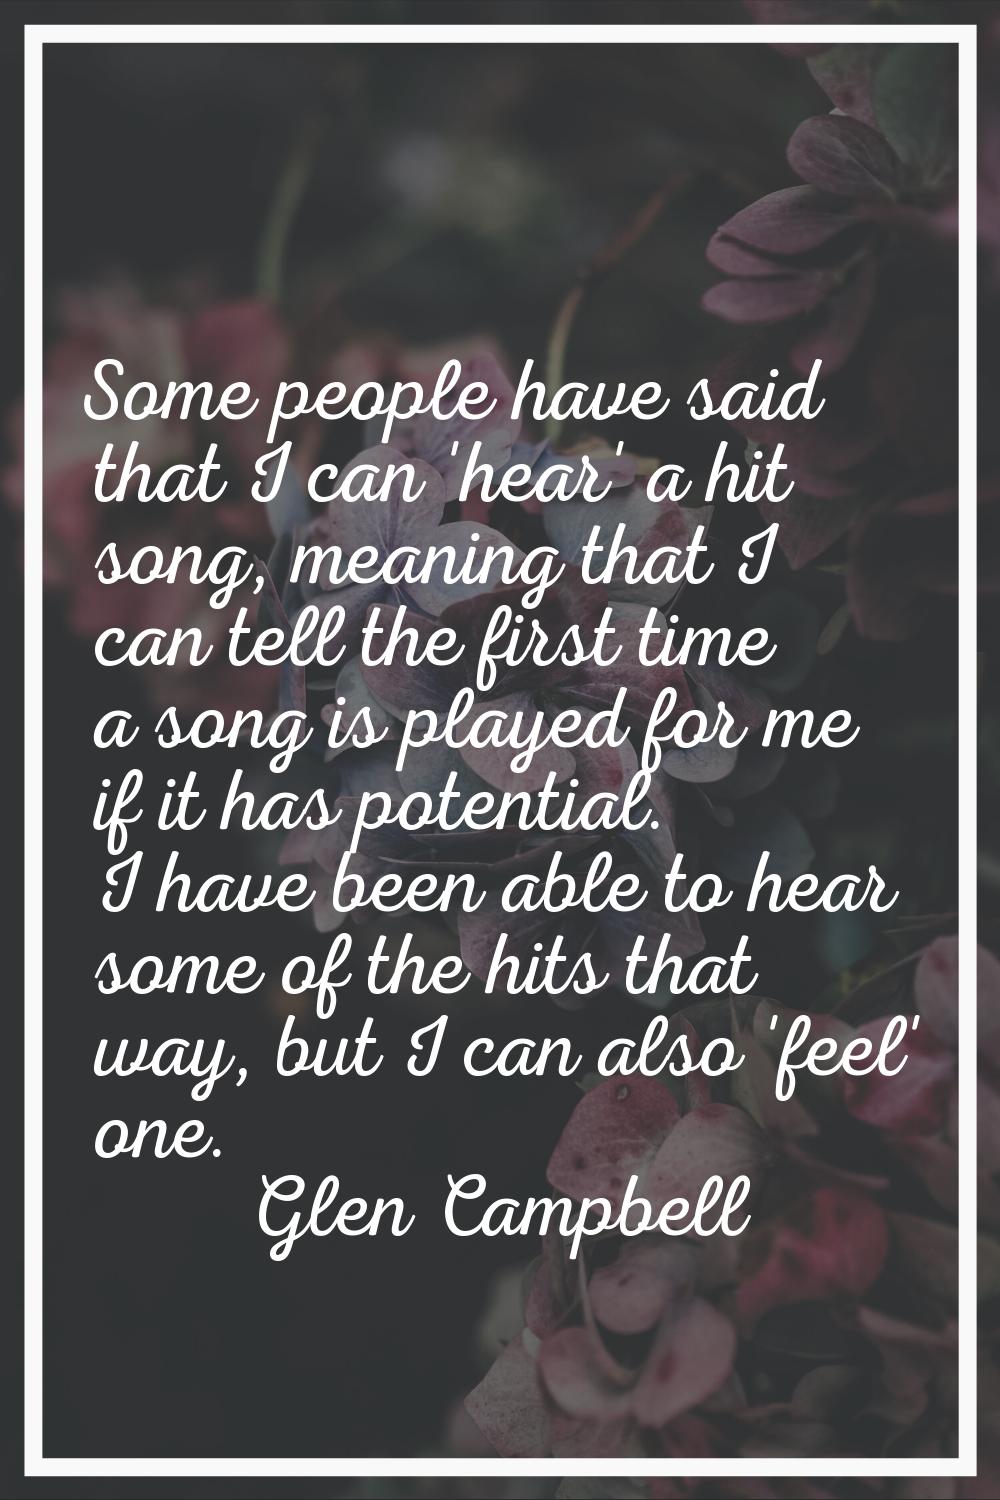 Some people have said that I can 'hear' a hit song, meaning that I can tell the first time a song i